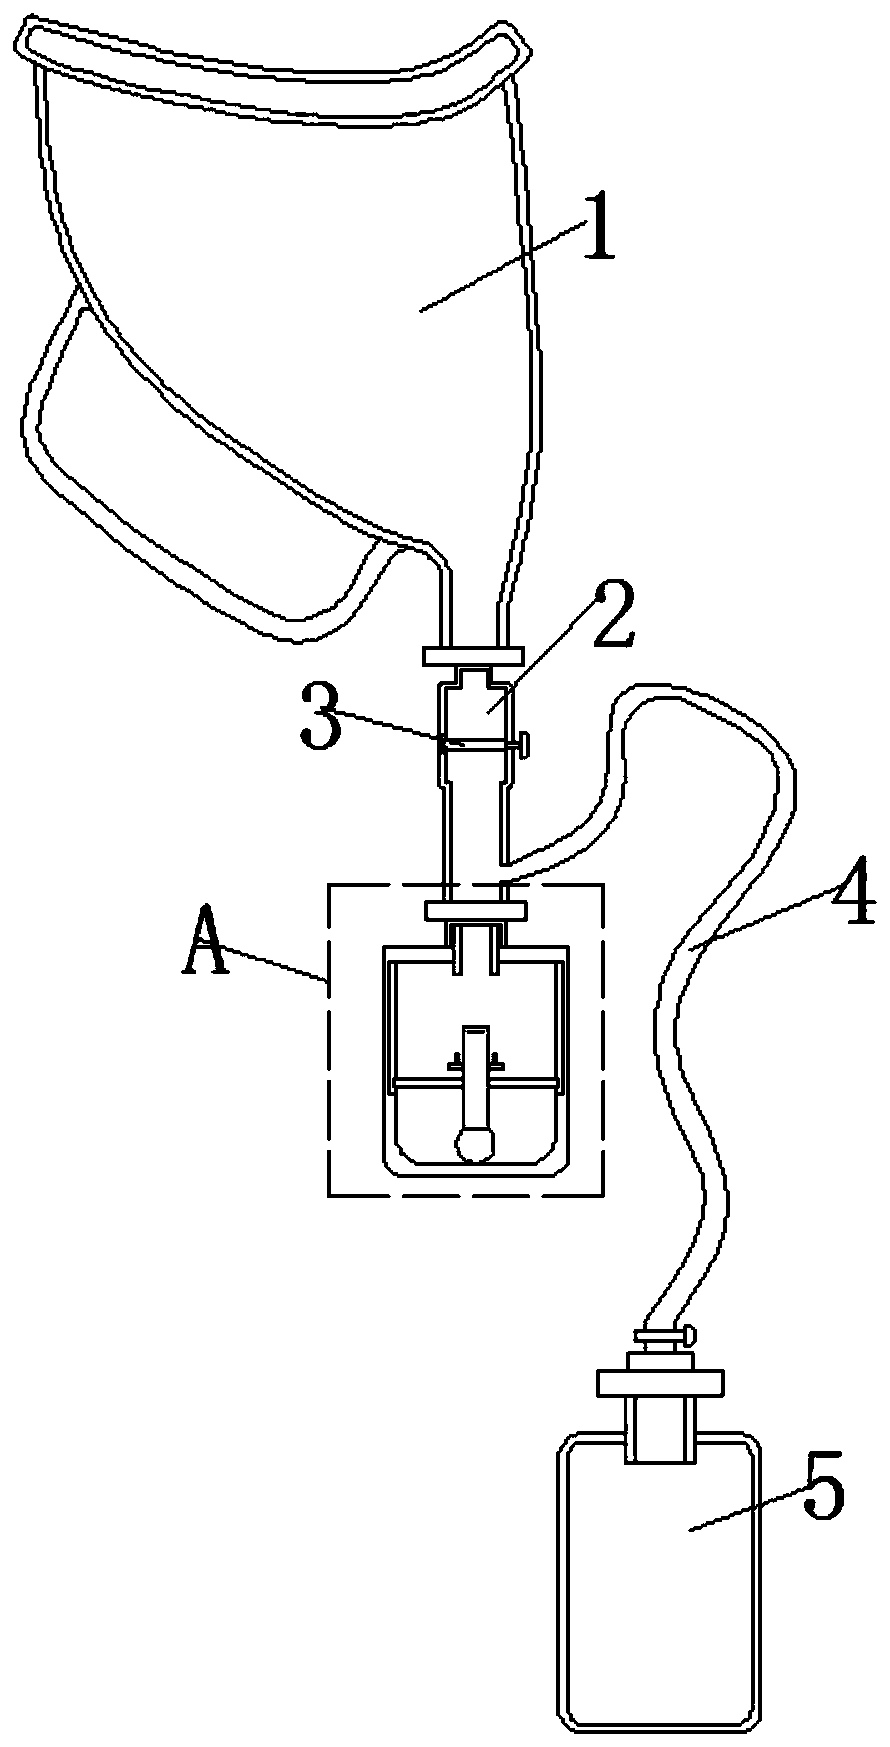 Urine sampling and retaining device for nephrology departments